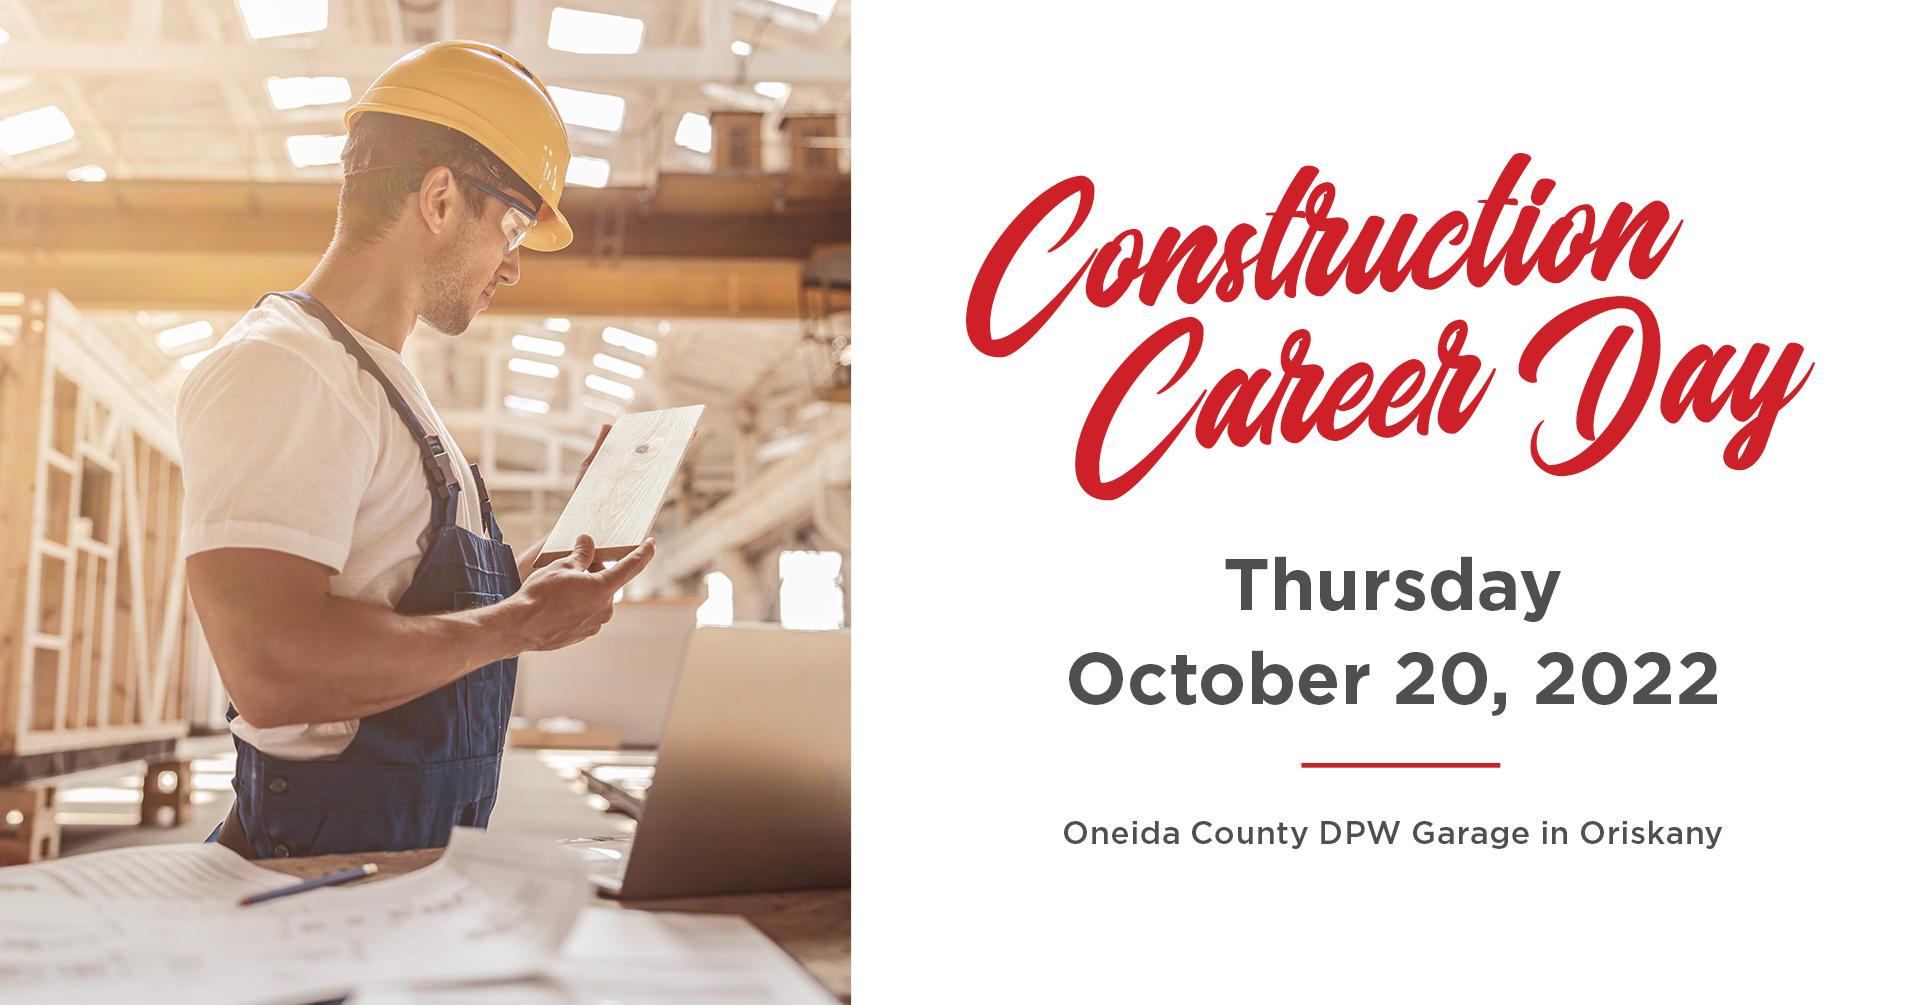 17th Annual Mohawk Valley Construction Career Day – October 20, 2022